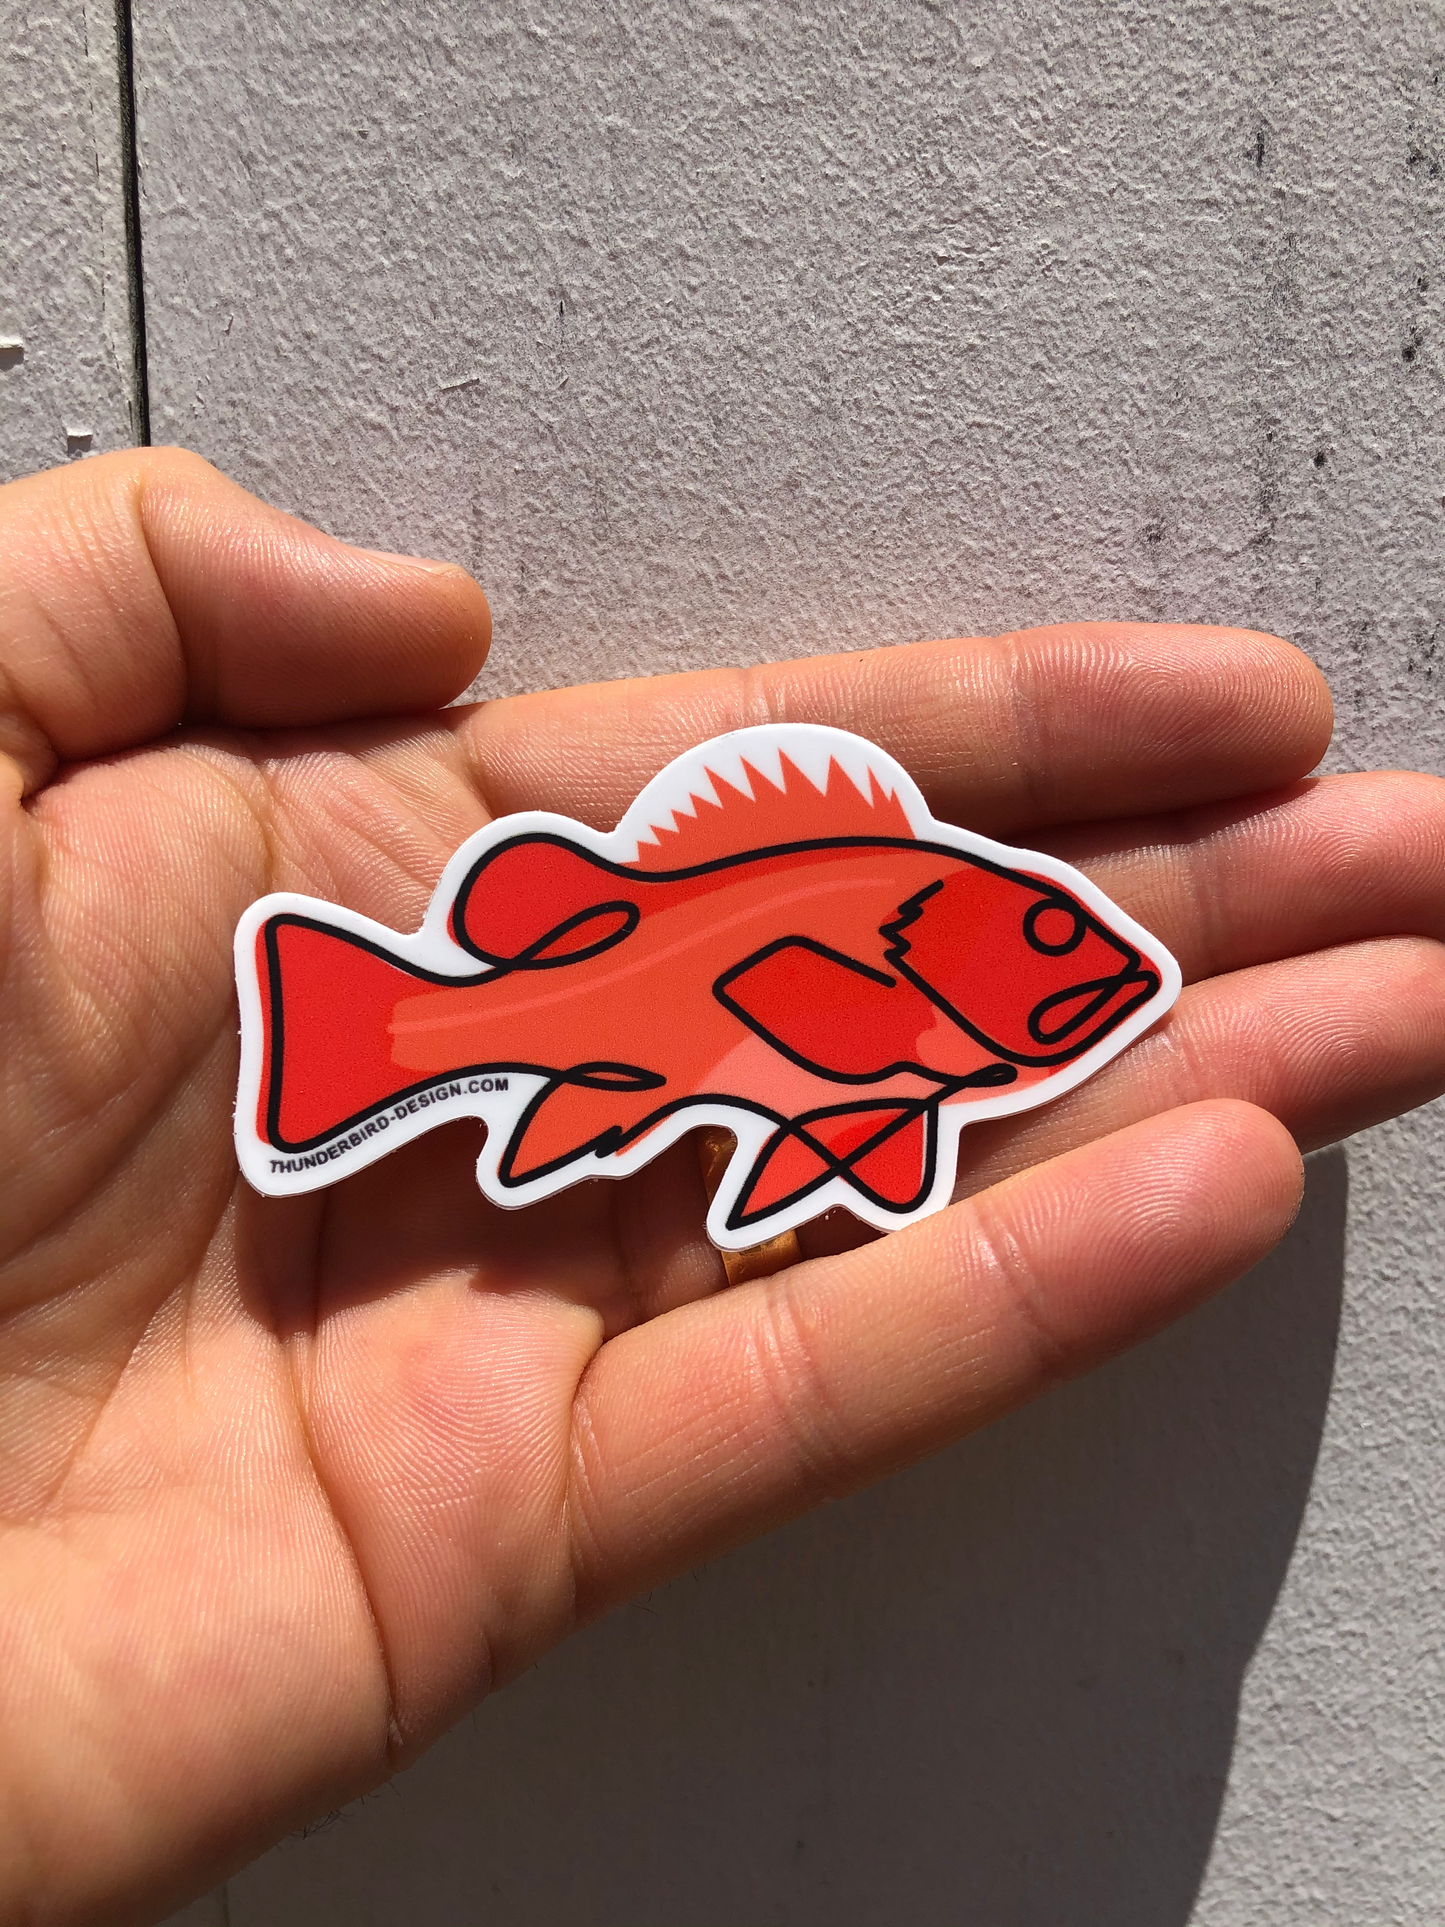 Thunderbird Design StudioVermillion Rockfish - Single Line DecalVermillion Rockfish - Single Line Decal
Drawn, Single Line Contour Illustration of a Vermilion Rockfish.
3" Weatherproof matte decals perfect for your water bottle, tackle box, car window or whatever else